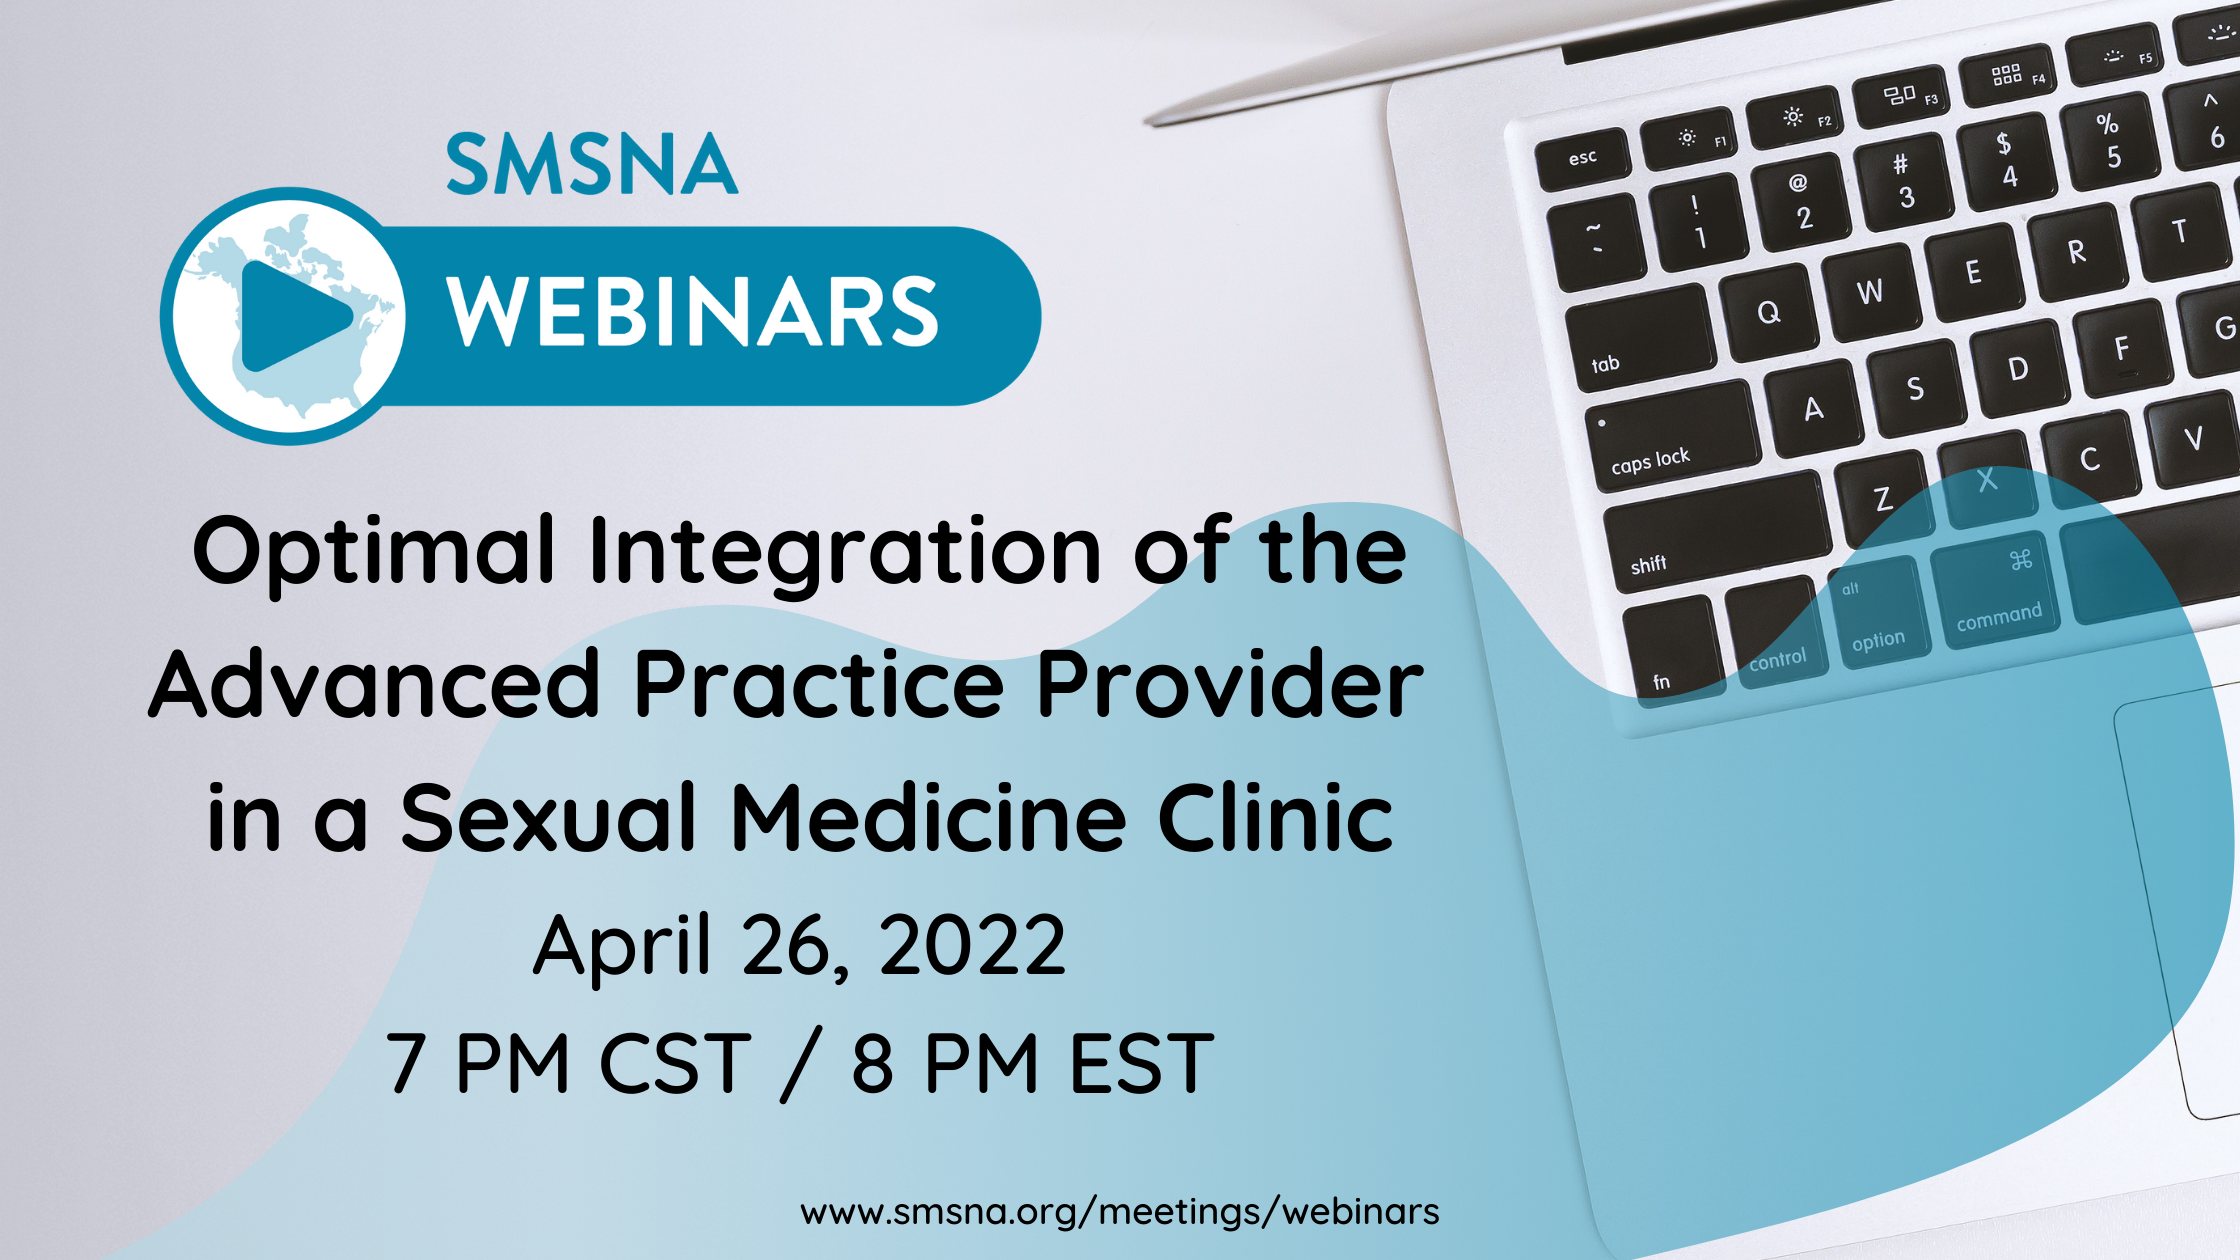 Optimal Integration of the Advanced Practice Provider in a Sexual Medicine Clinic